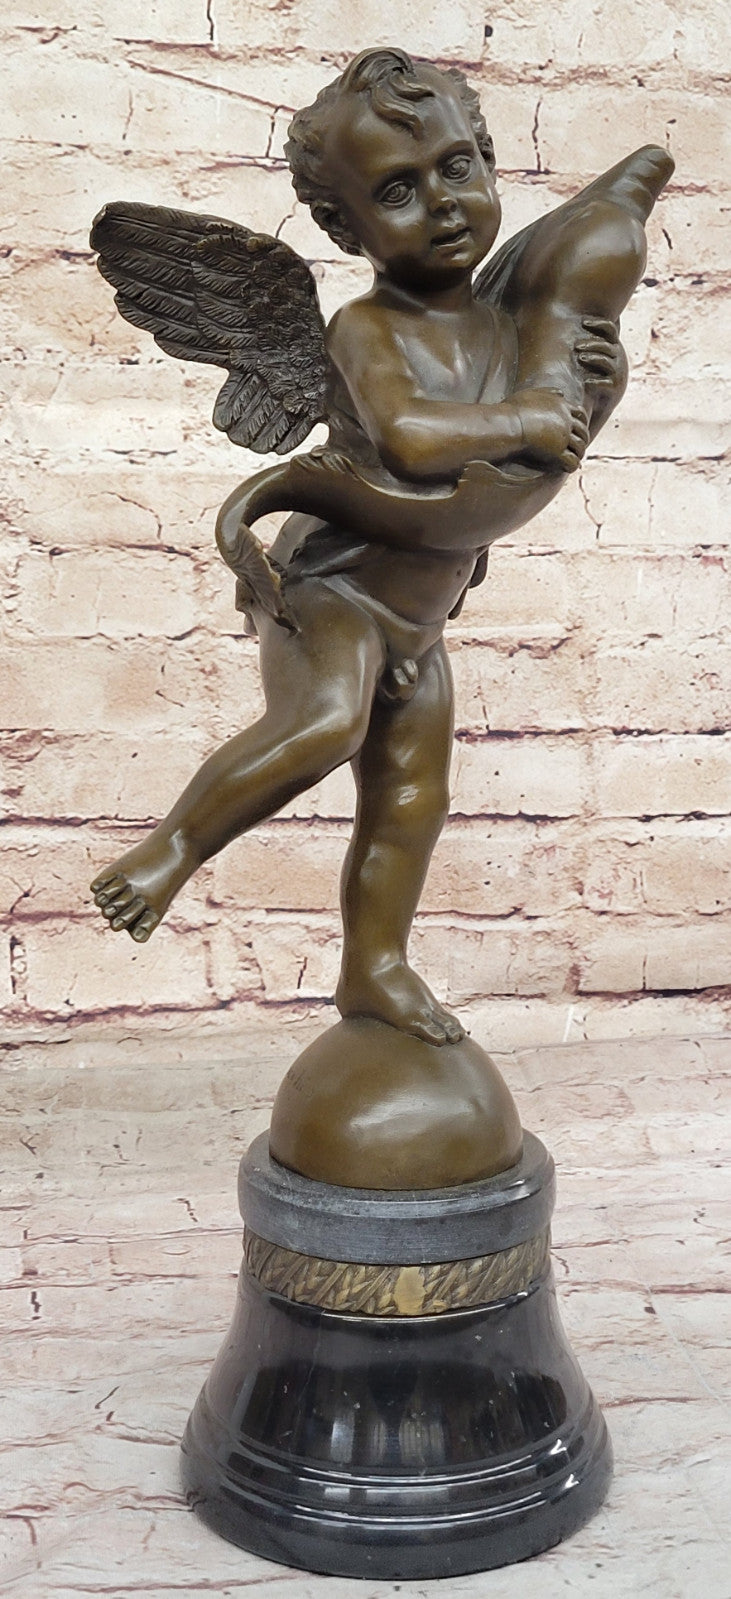 Collectible Bronze Sculpture: Artistic Semi-Nude Boy and Dolphin